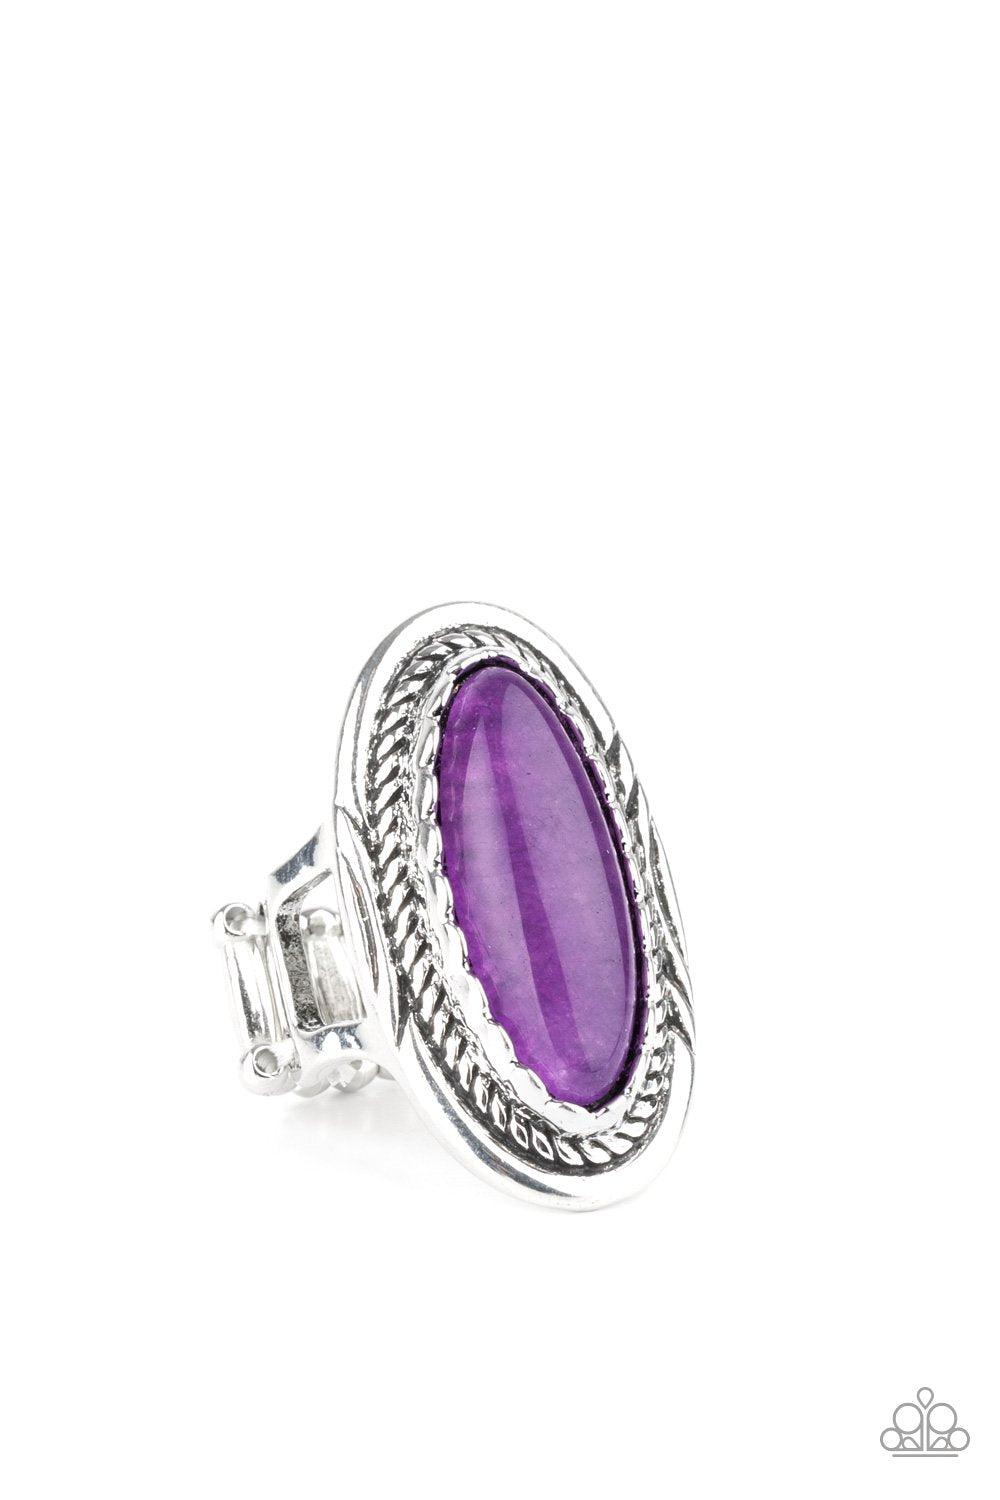 Primal Instincts Purple Stone Ring - Paparazzi Accessories- lightbox - CarasShop.com - $5 Jewelry by Cara Jewels